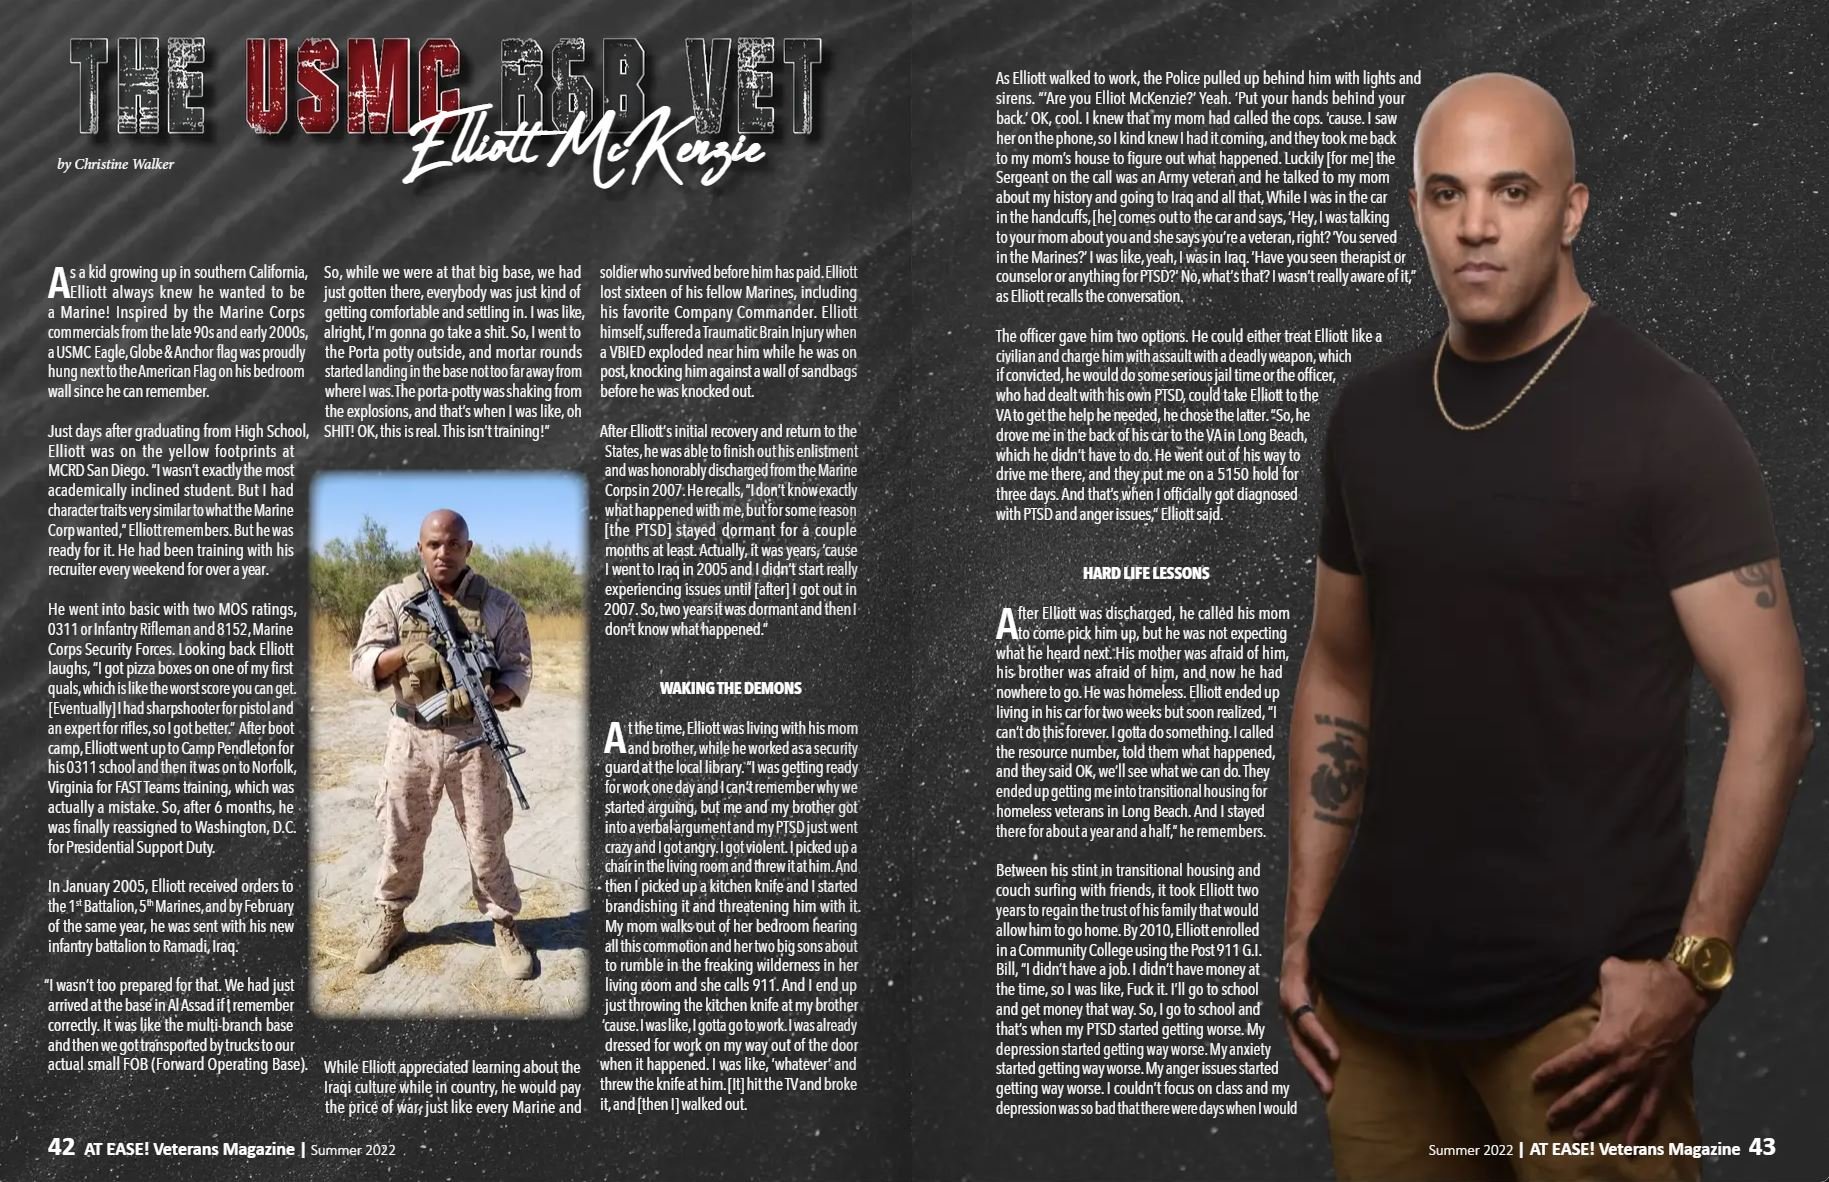 ................Featured in At Ease! Veterans Magazine!!...............